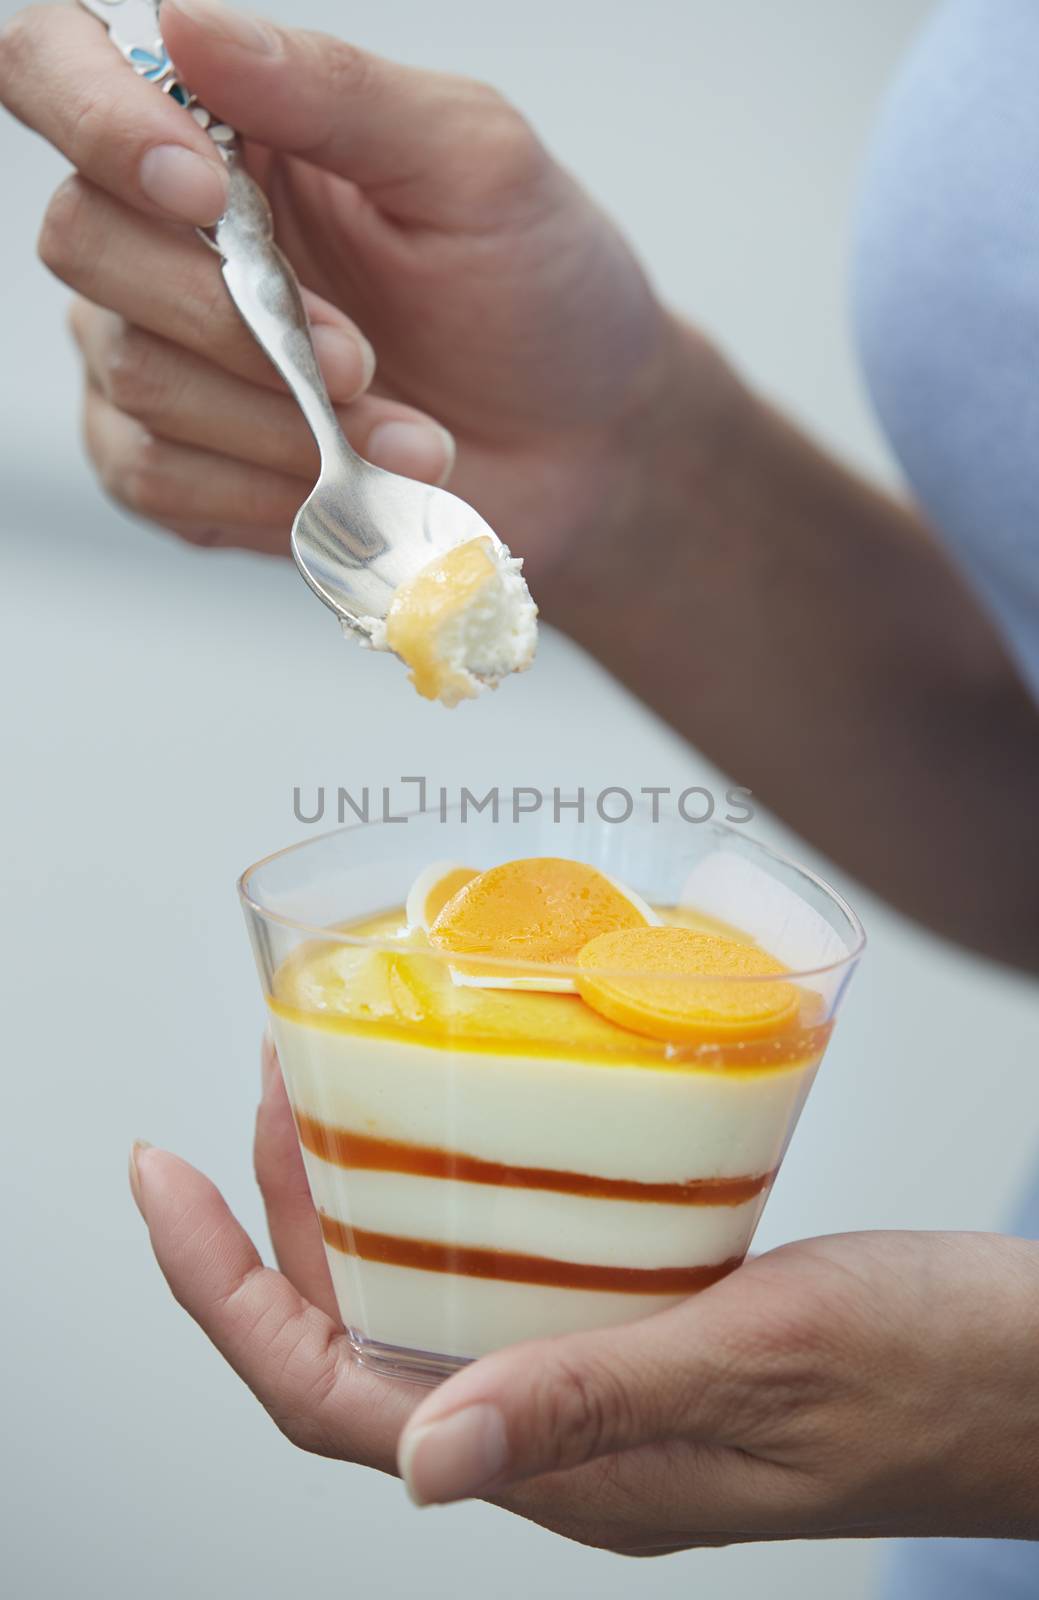 Woman eating fruit mousse by Novic